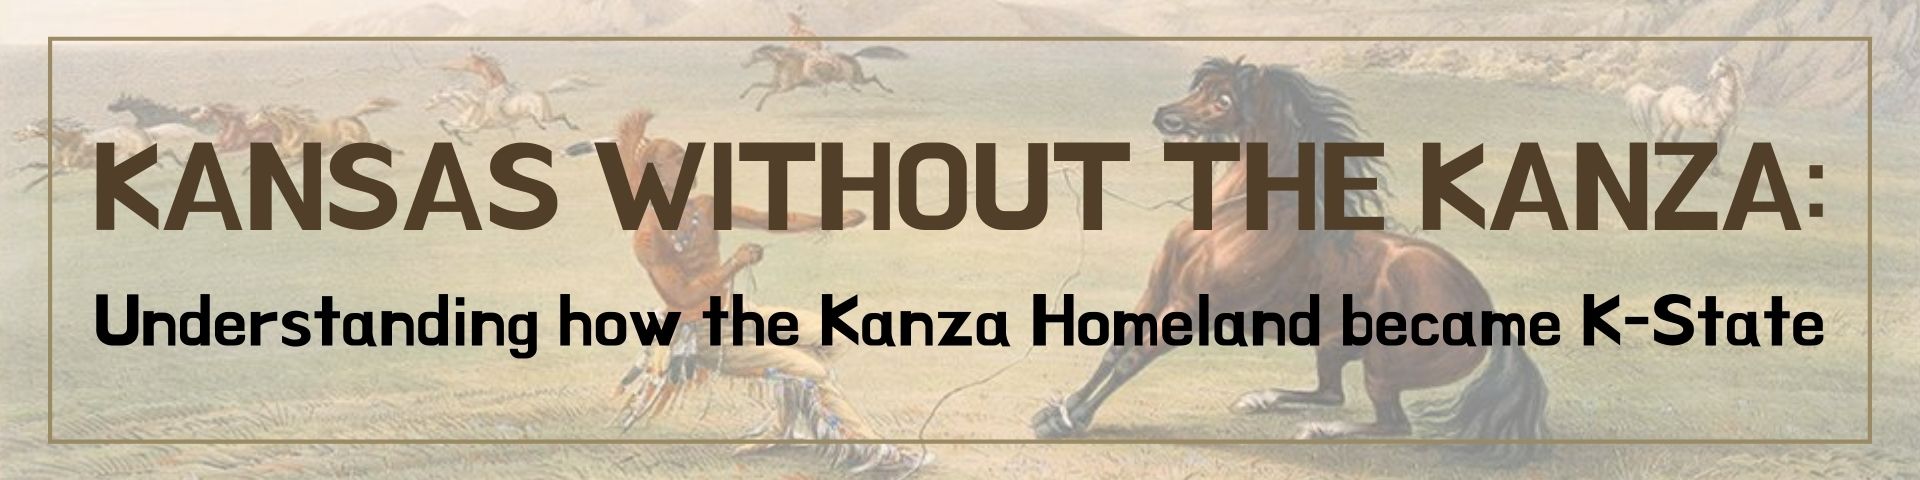 KANSAS WITHOUT THE KANZA: Understanding how the Kanza Homeland became K-State